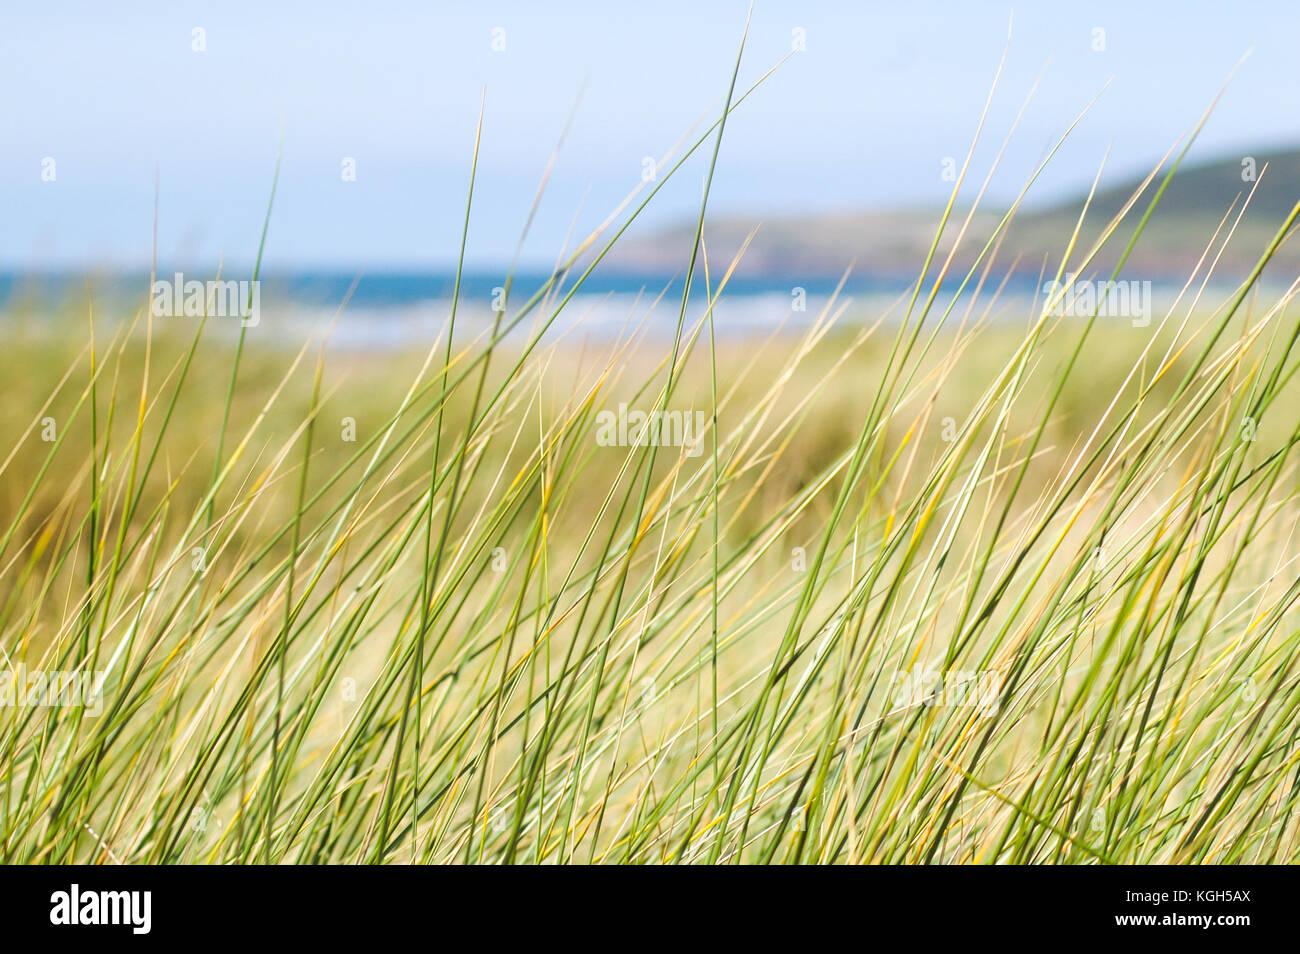 Beach grass frames the beach and sea horizon. A crest of waves and the deep blue of the sea resting in the background Stock Photo